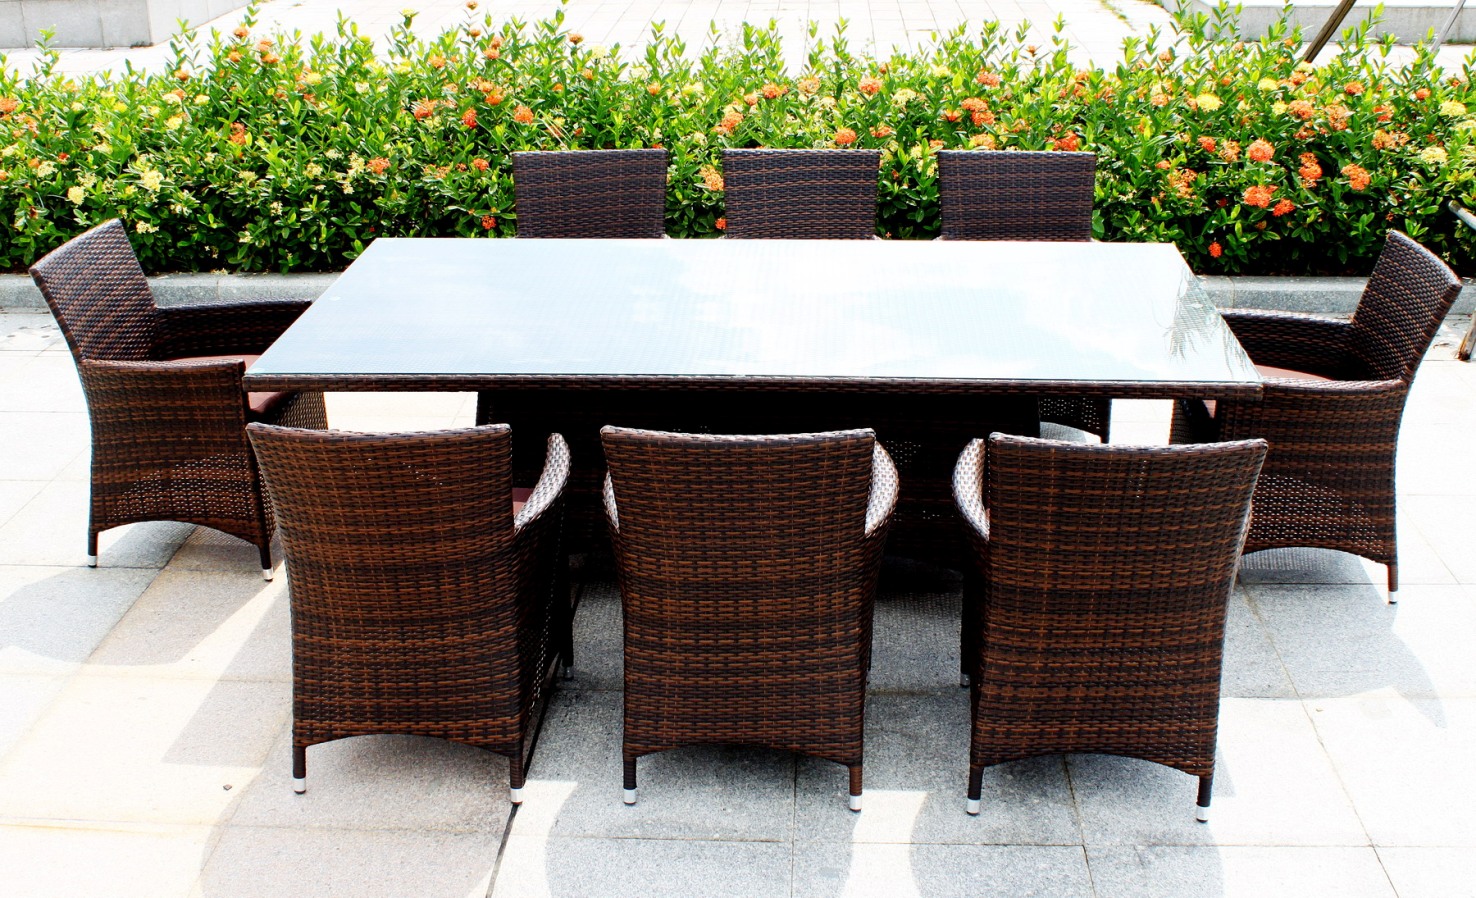 outdoor dining table ideas photo - 7